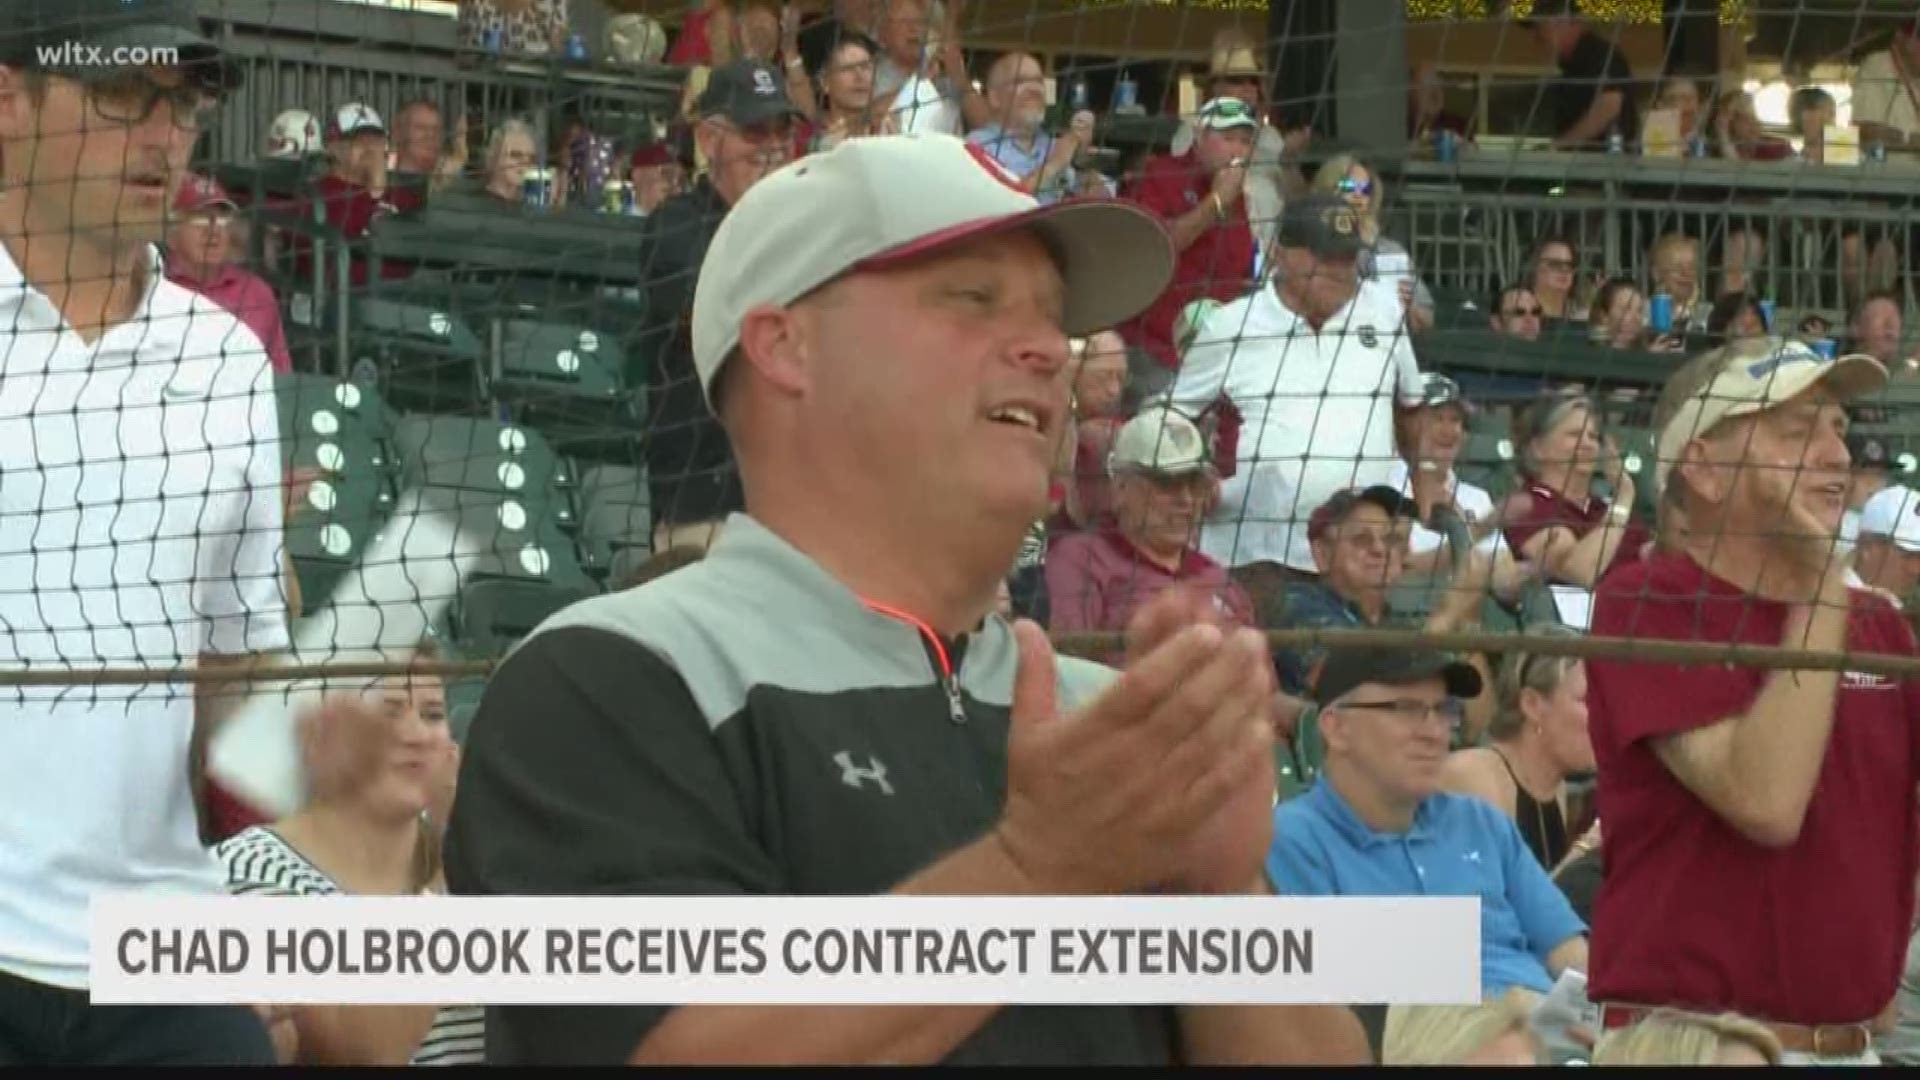 Former USC Baseball coach Chad Holbrook will be a fixture in the Palmetto State baseball scene for awhile. The College Of Charleston gave him a five year extension.